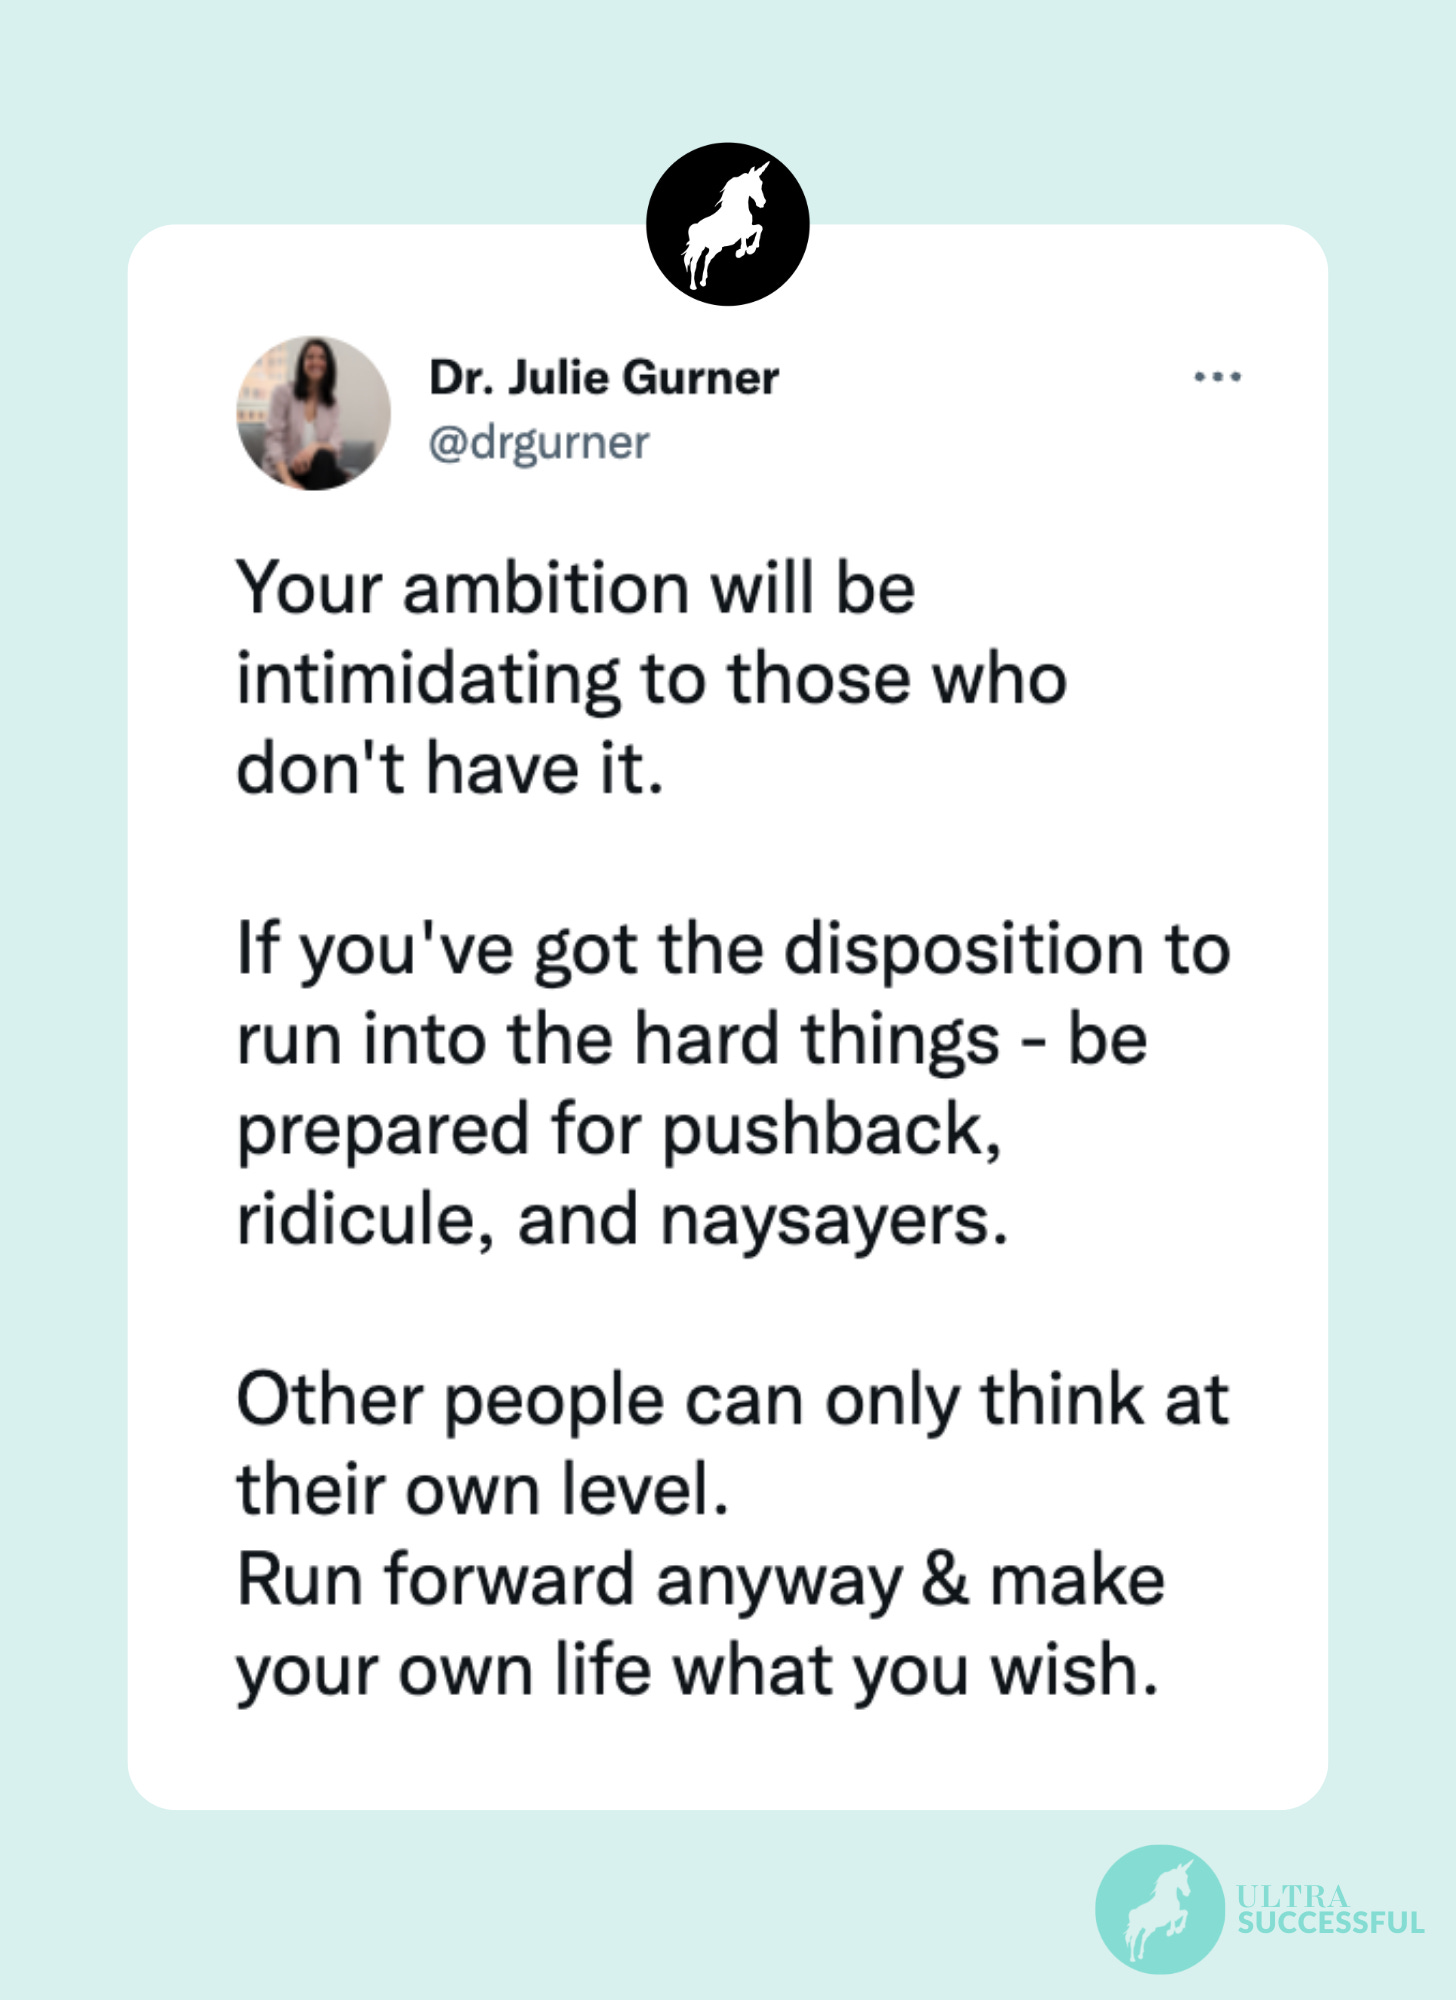 @drgurner: Your ambition will be intimidating to those who don't have it.  If you've got the disposition to run into the hard things - be prepared for pushback, ridicule, and naysayers.  Other people can only think at their own level. Run forward anyway & make your own life what you wish.